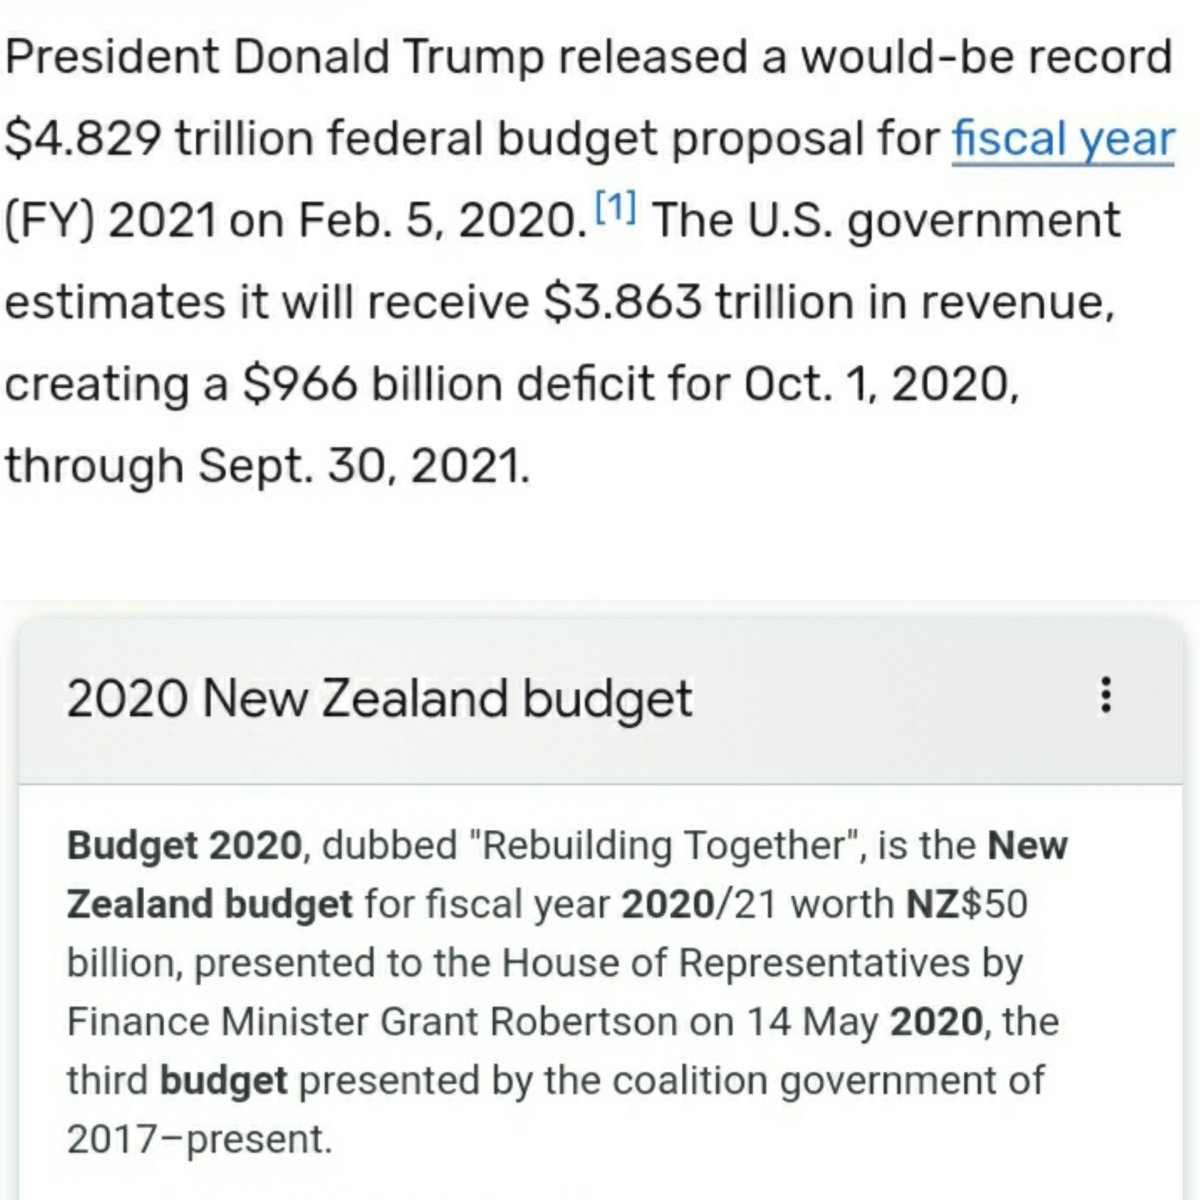 Here is a comparison of countries budgets